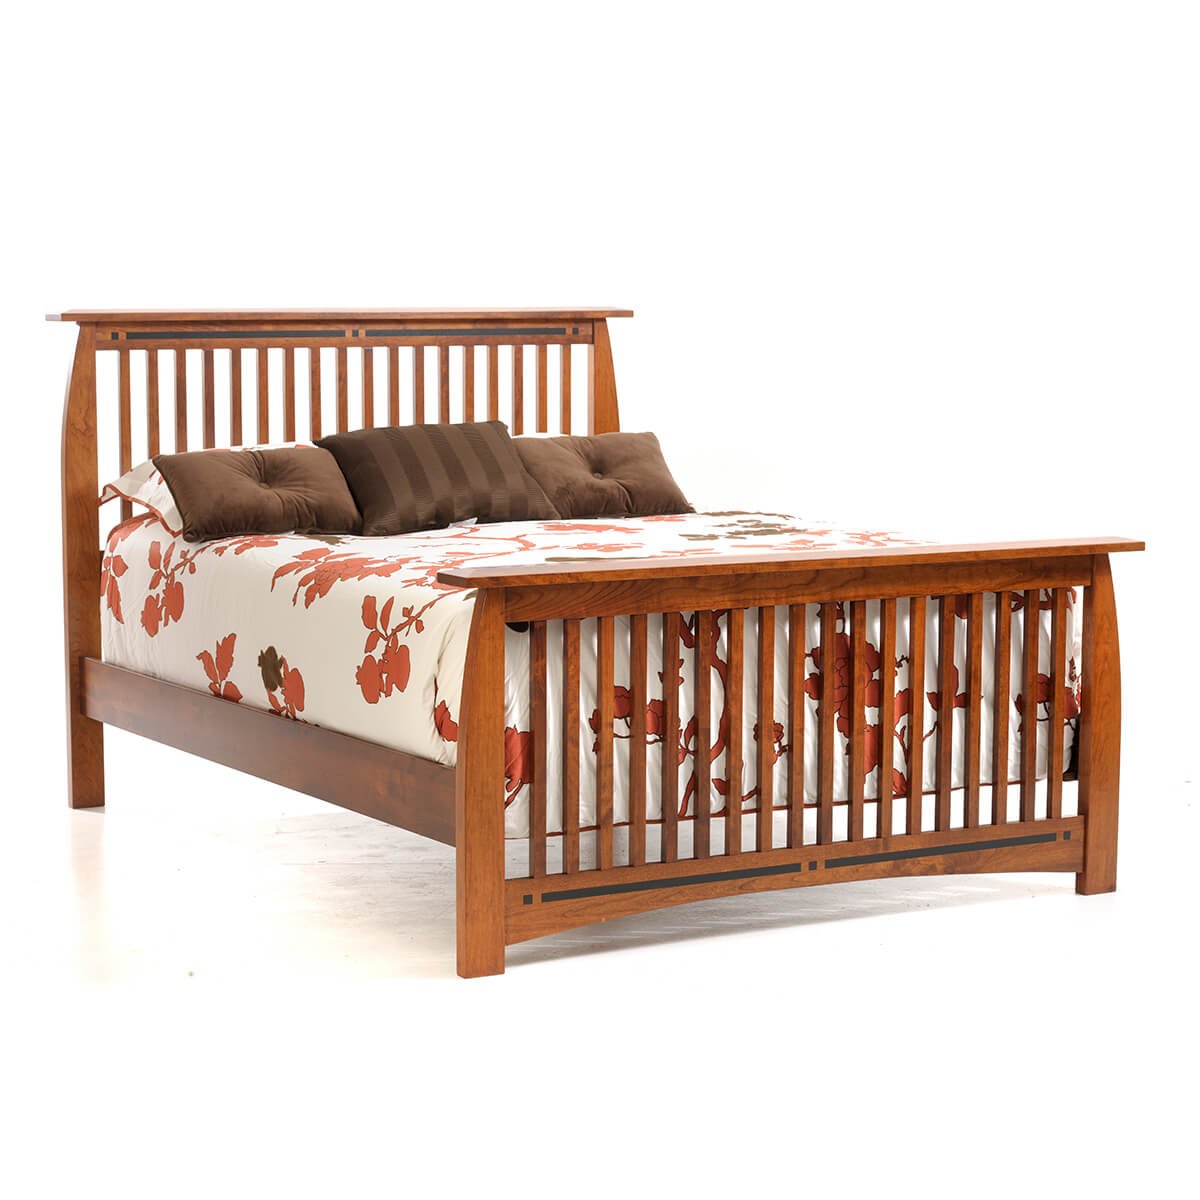 Read more about the article Vineyard Slat Bed